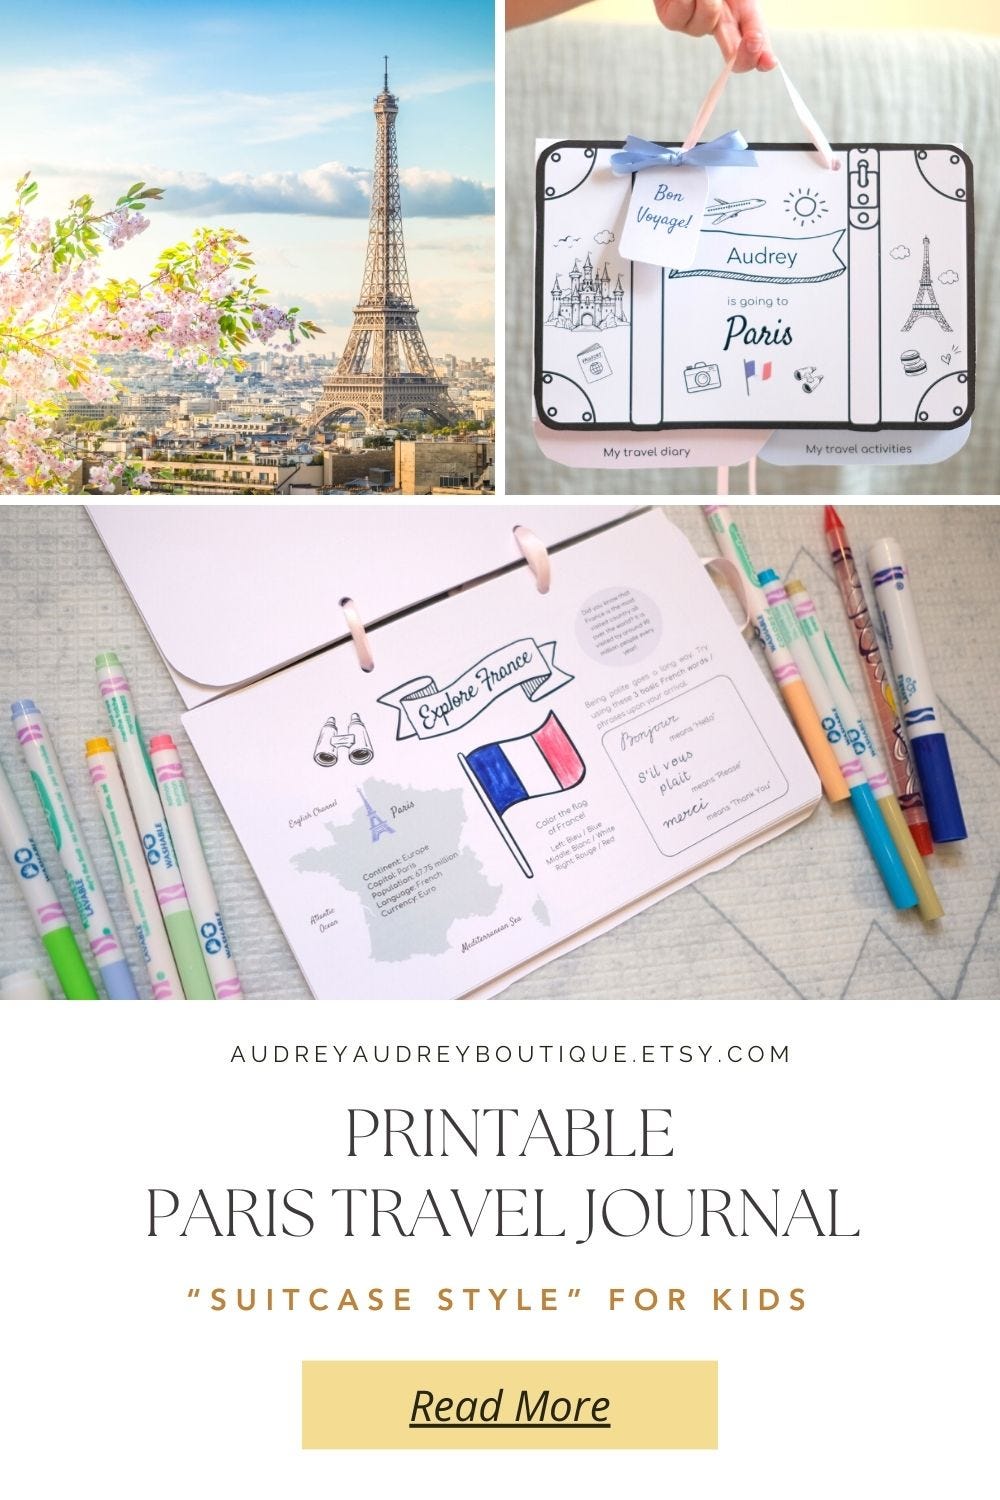 Transform Your Family Adventures into Cherished Memories with Our  Personalized Kids' Travel Paris Journal Kit!, by Audreyaudreyboutique